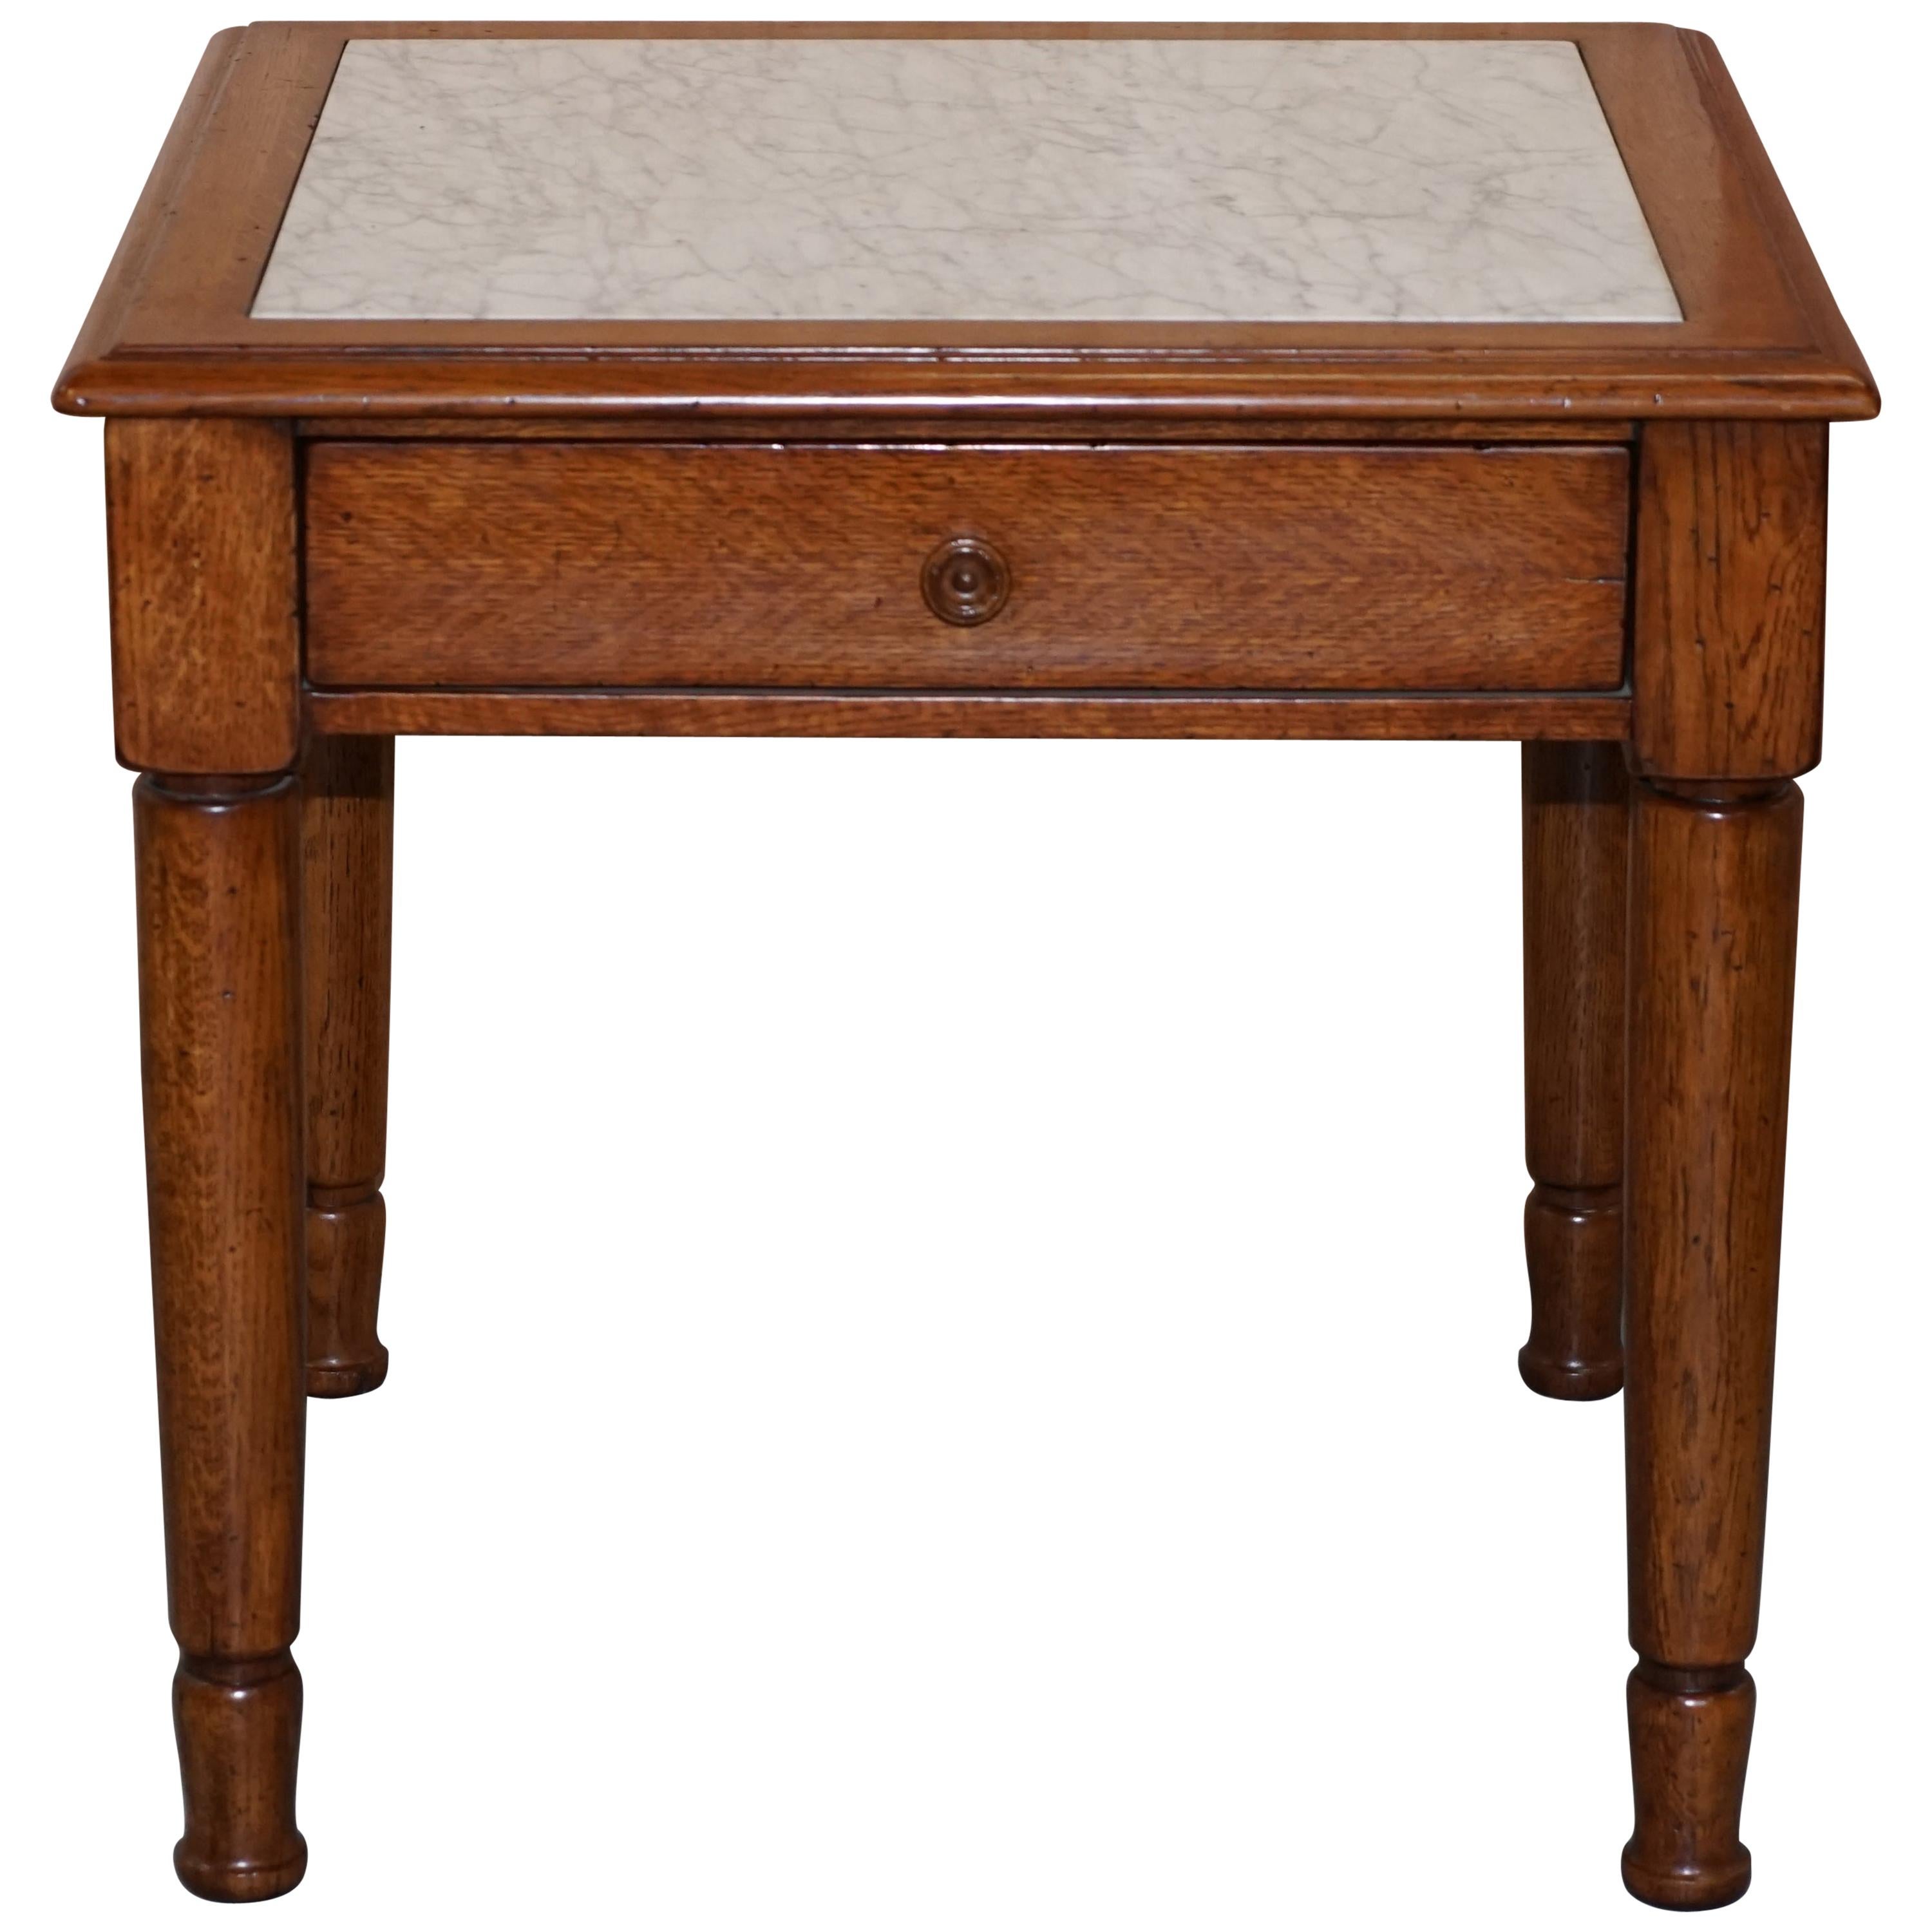 Stunning Ralph Lauren Large Side Table with Marble Top and Single Drawer